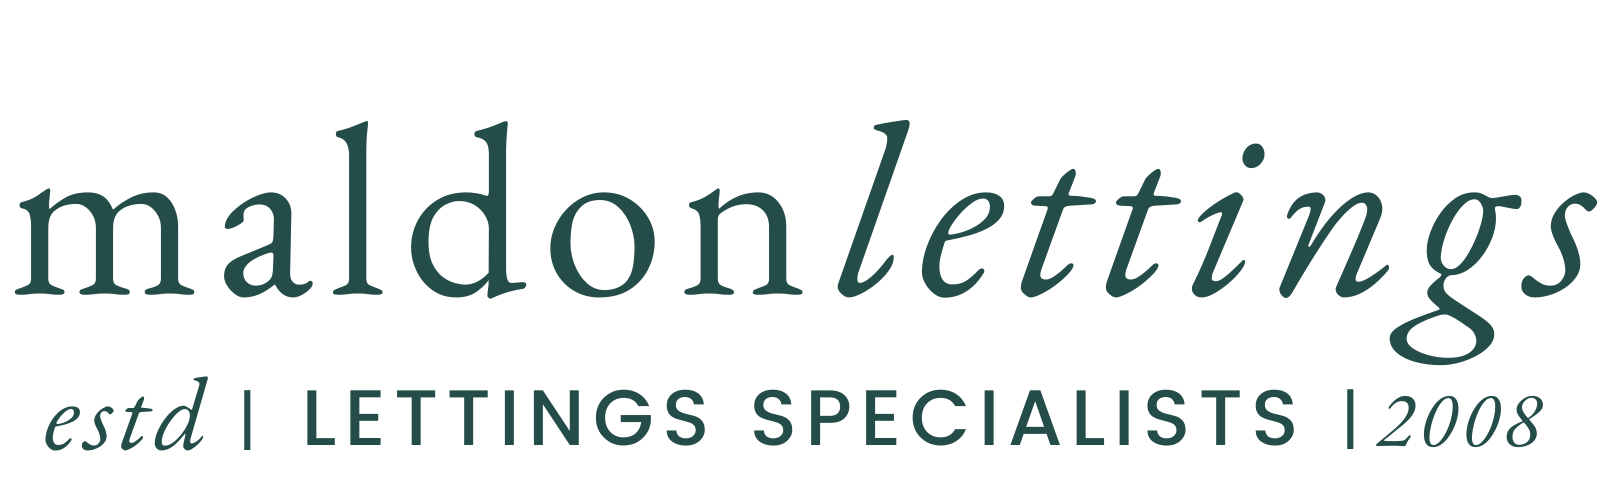 Maldon Lettings | Letting Specialists